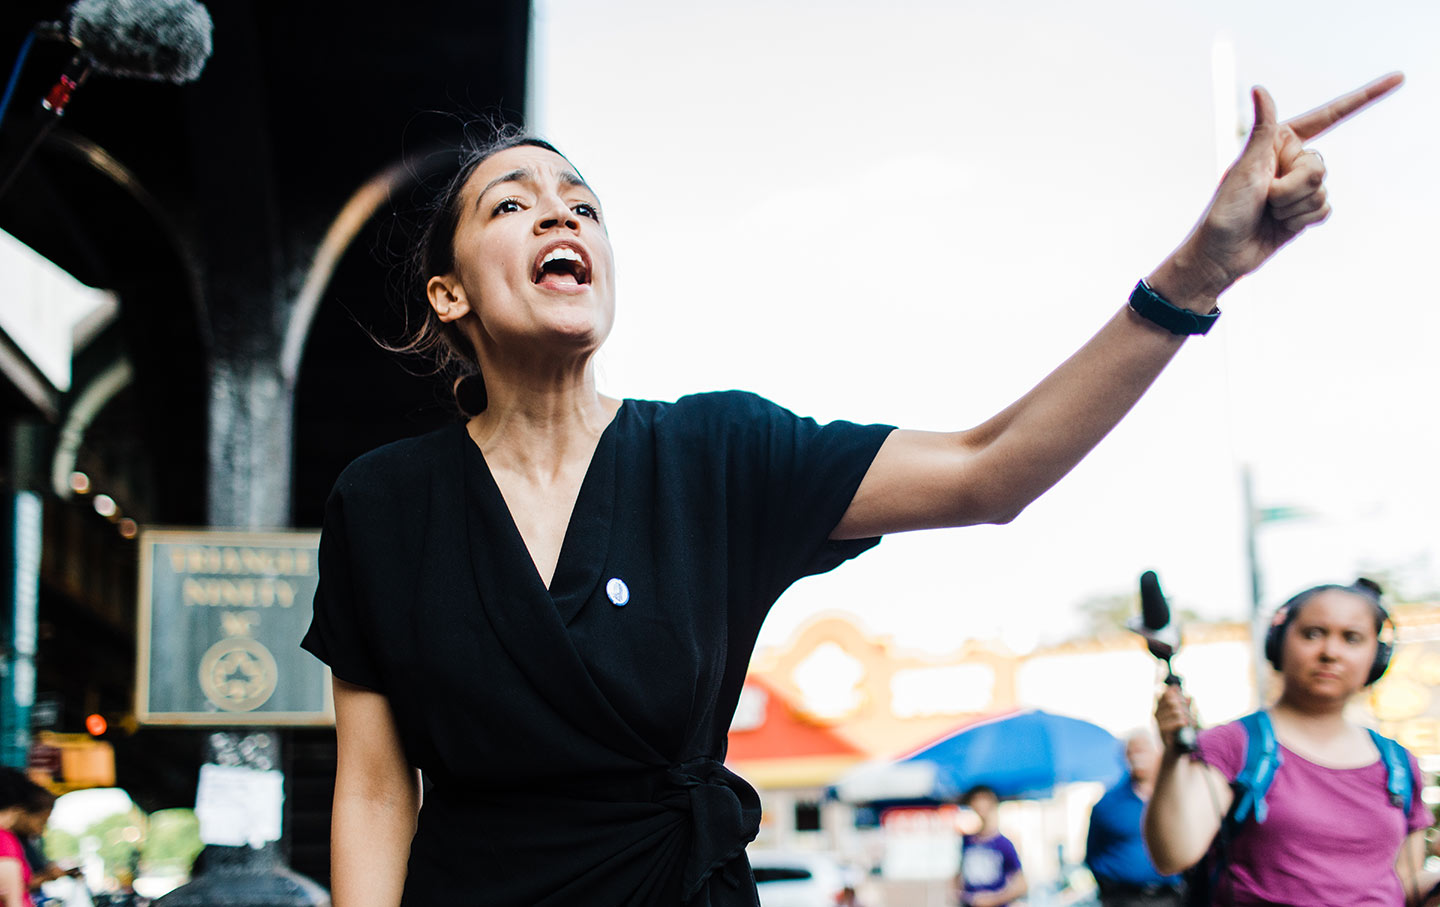 Image: Spewing total nonsense, Ocasio-Cortez claims “climate governance” will create “racial justice” … do these nut jobs realize how stupid they sound?